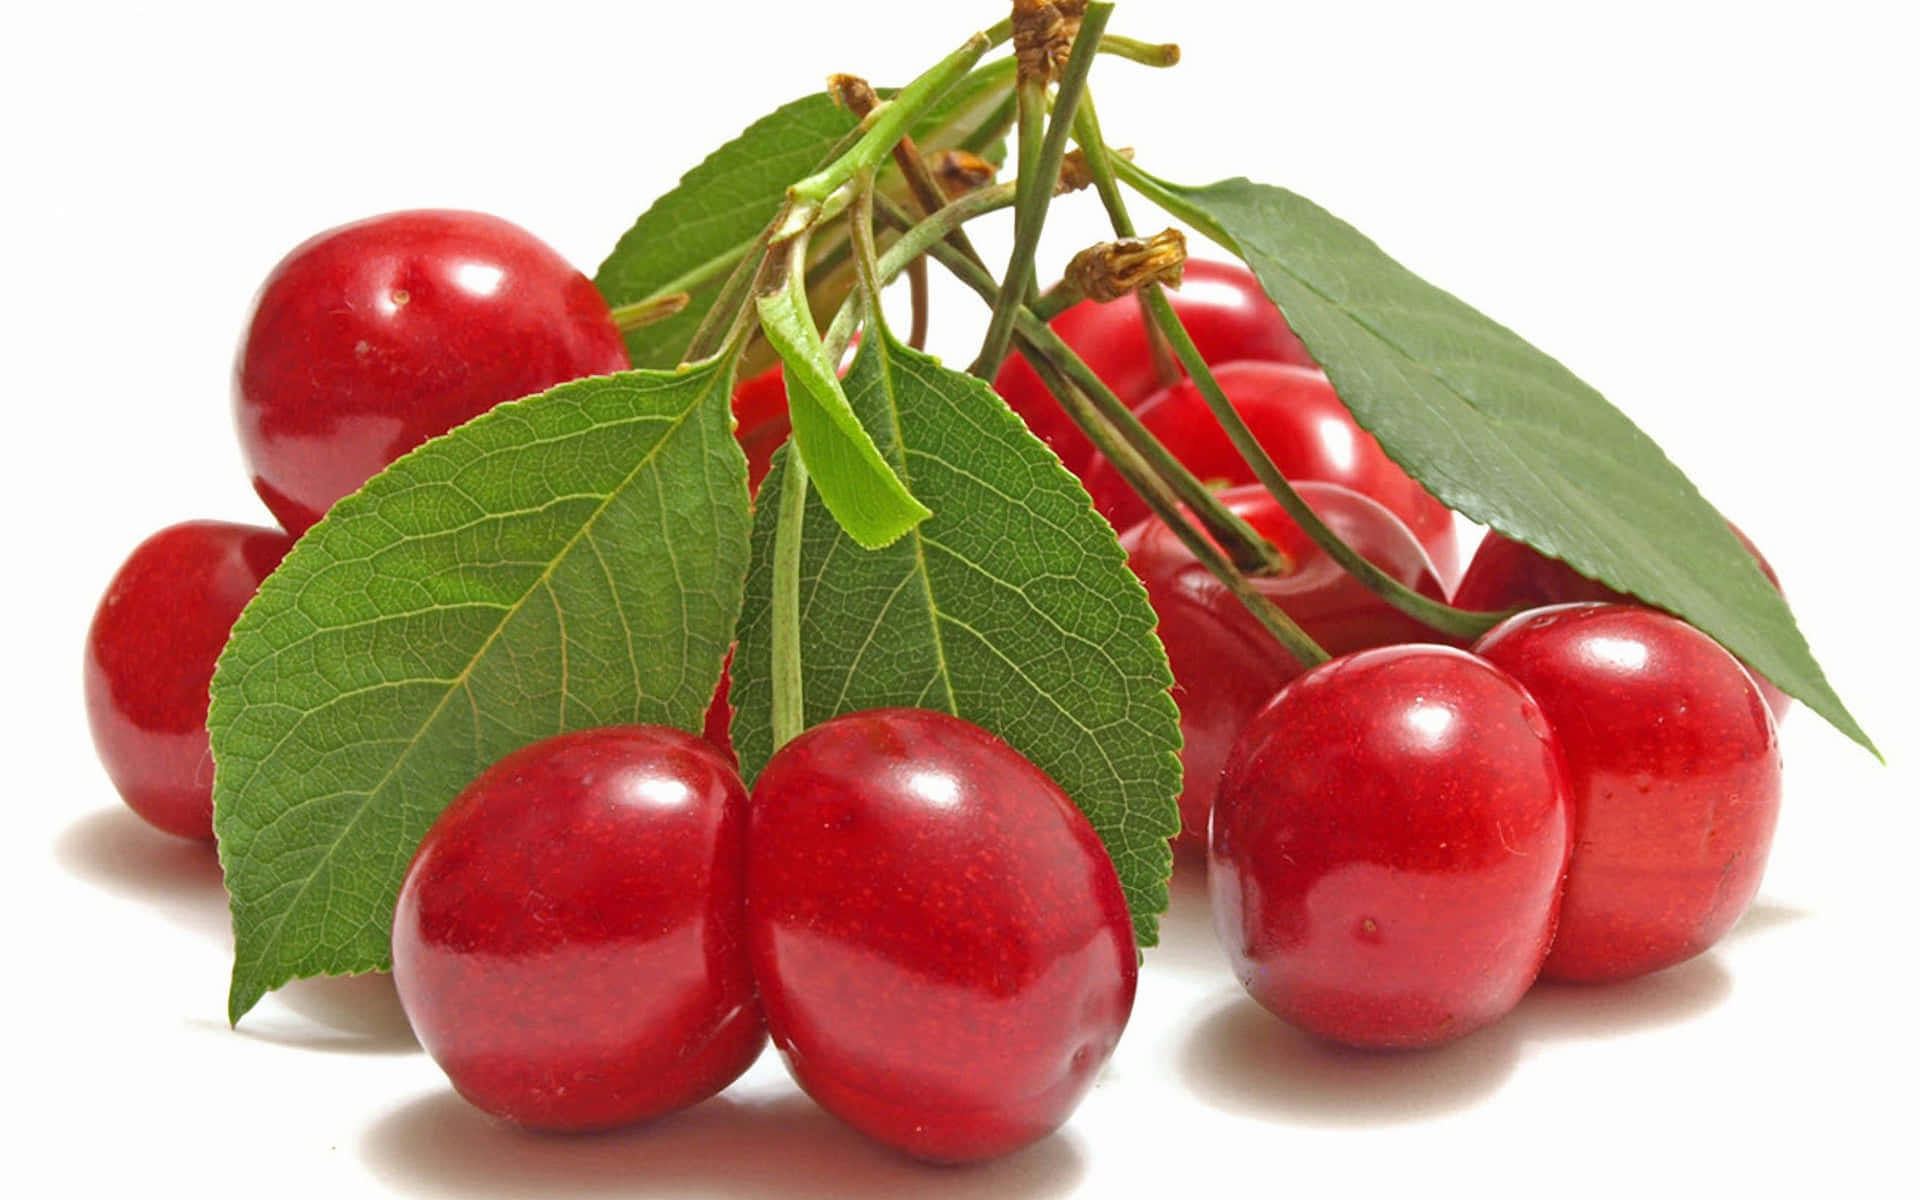 Bright red cherry fruit sits among vibrant green foliage